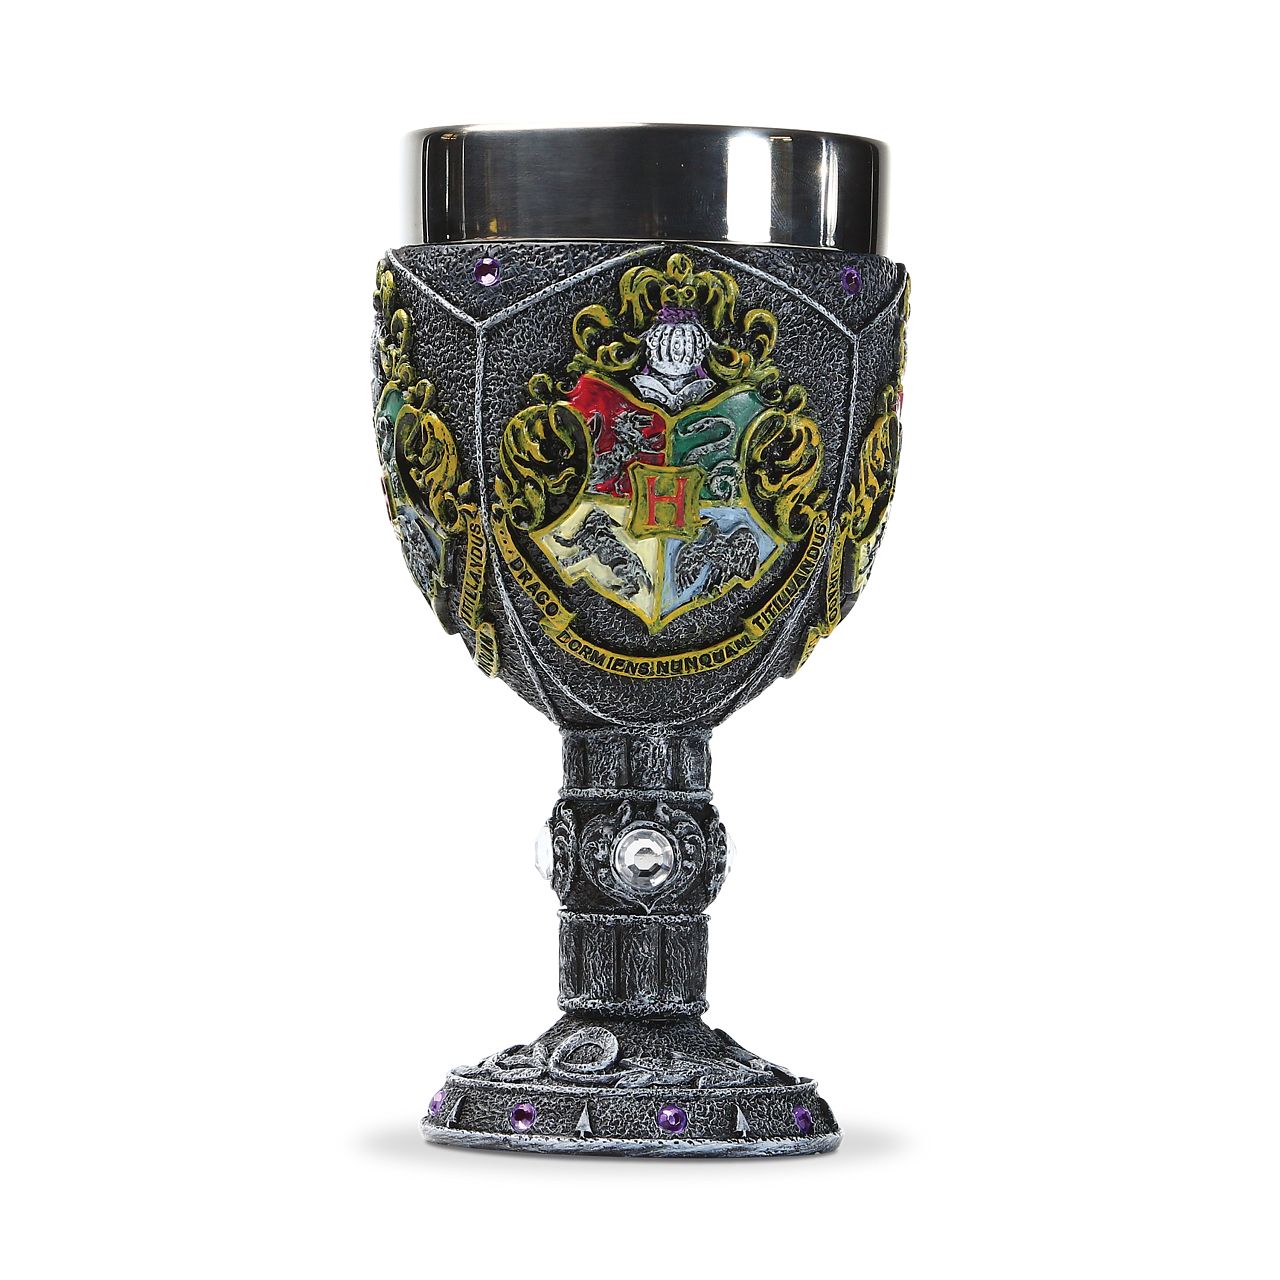 Hogwarts Decorative Goblet  Founded by the four greatest wizards of their time, Hogwarts School of Witchcraft and Wizardry has long been the pinnacle of magical learning. Show your school spirit with this elegant decorative goblet. Stainless steel rim.